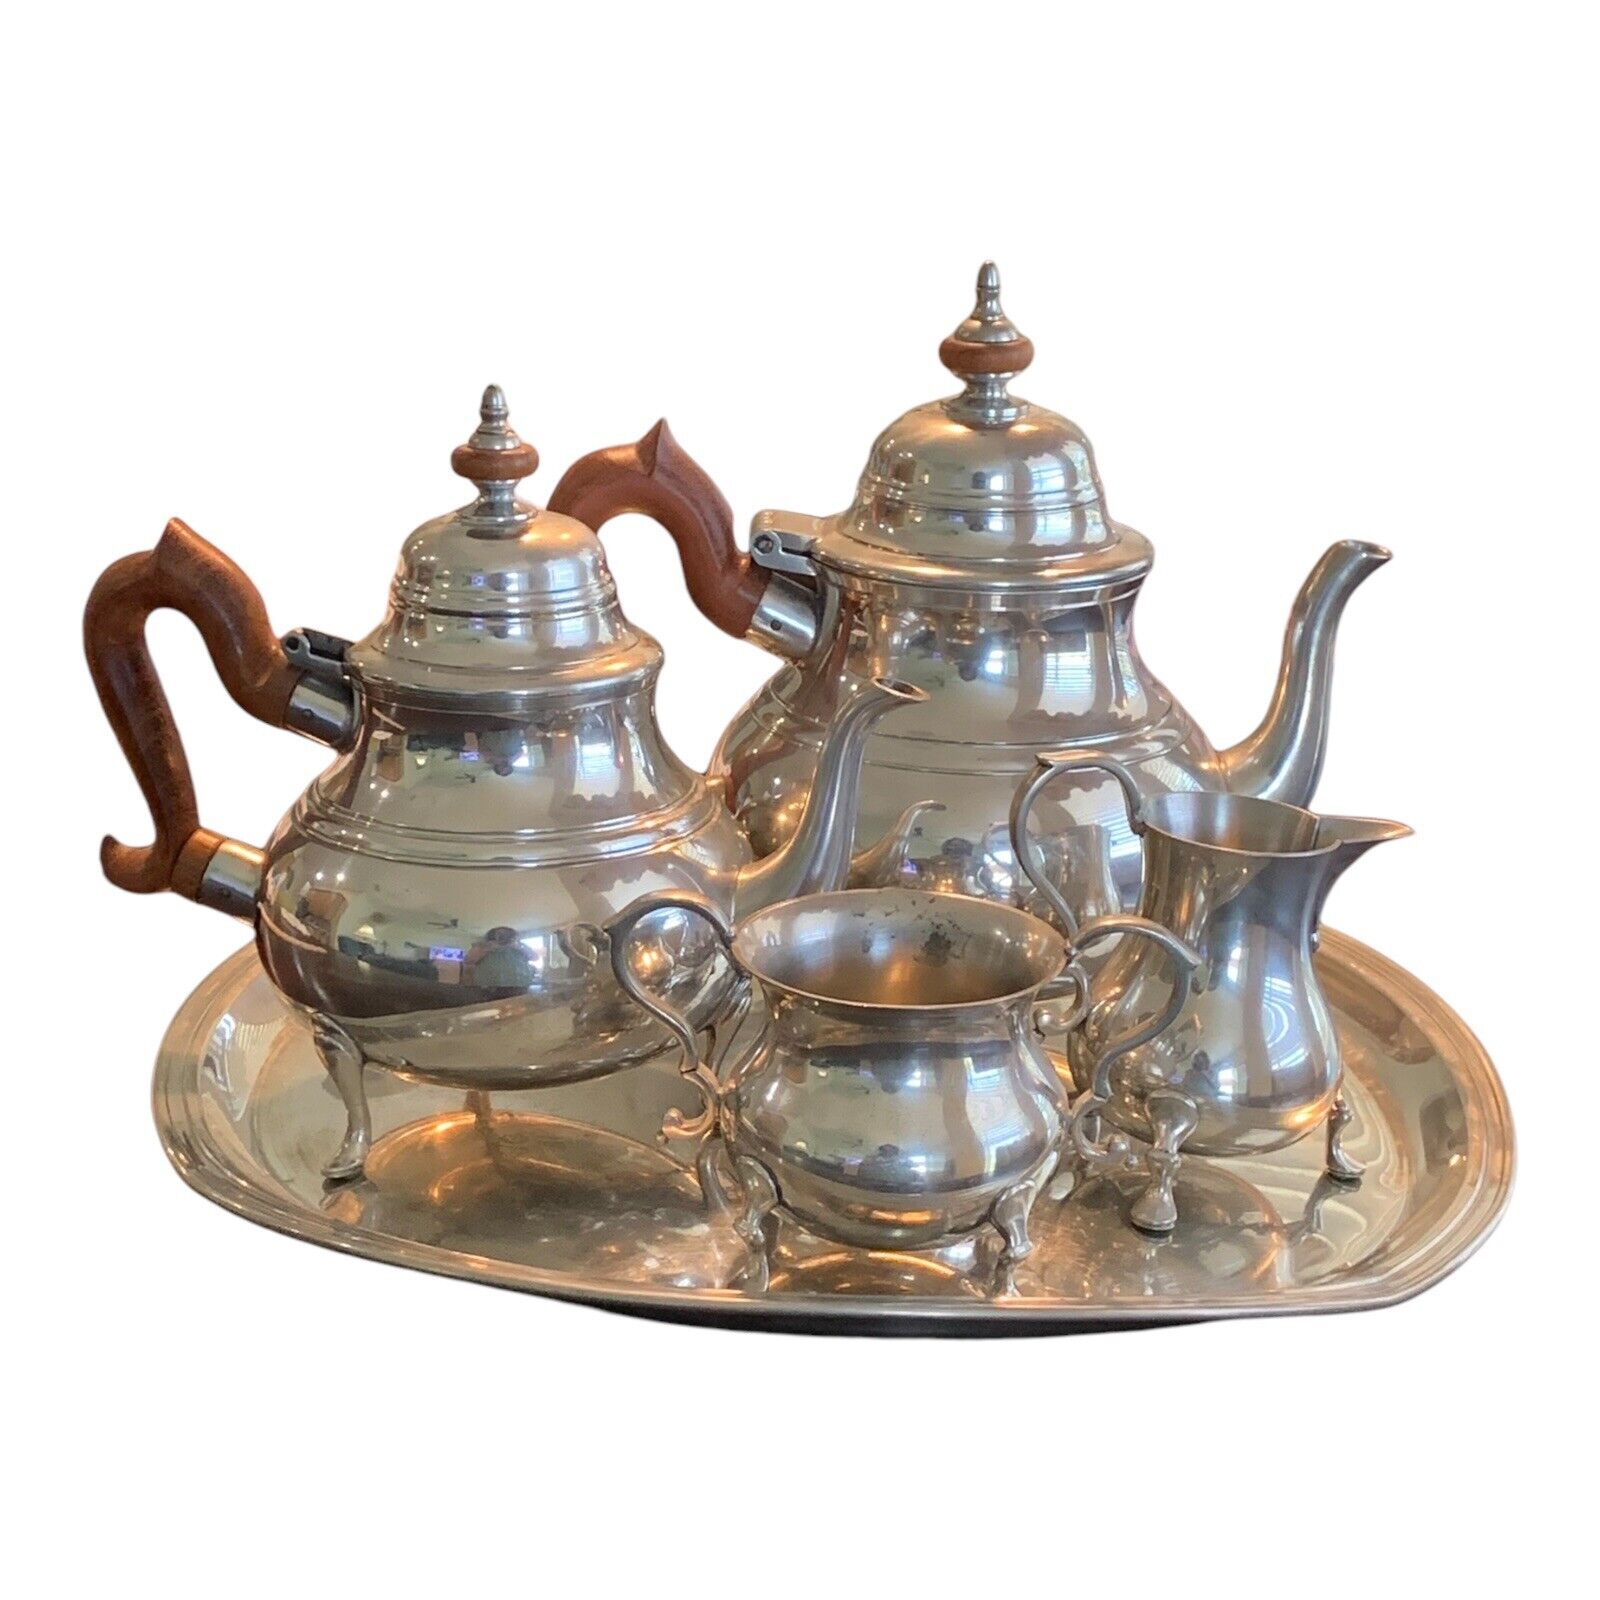 Williamsburg Kirk Stieff Pewter Coffee and Tea Set with Creamer, Sugar, and Tray